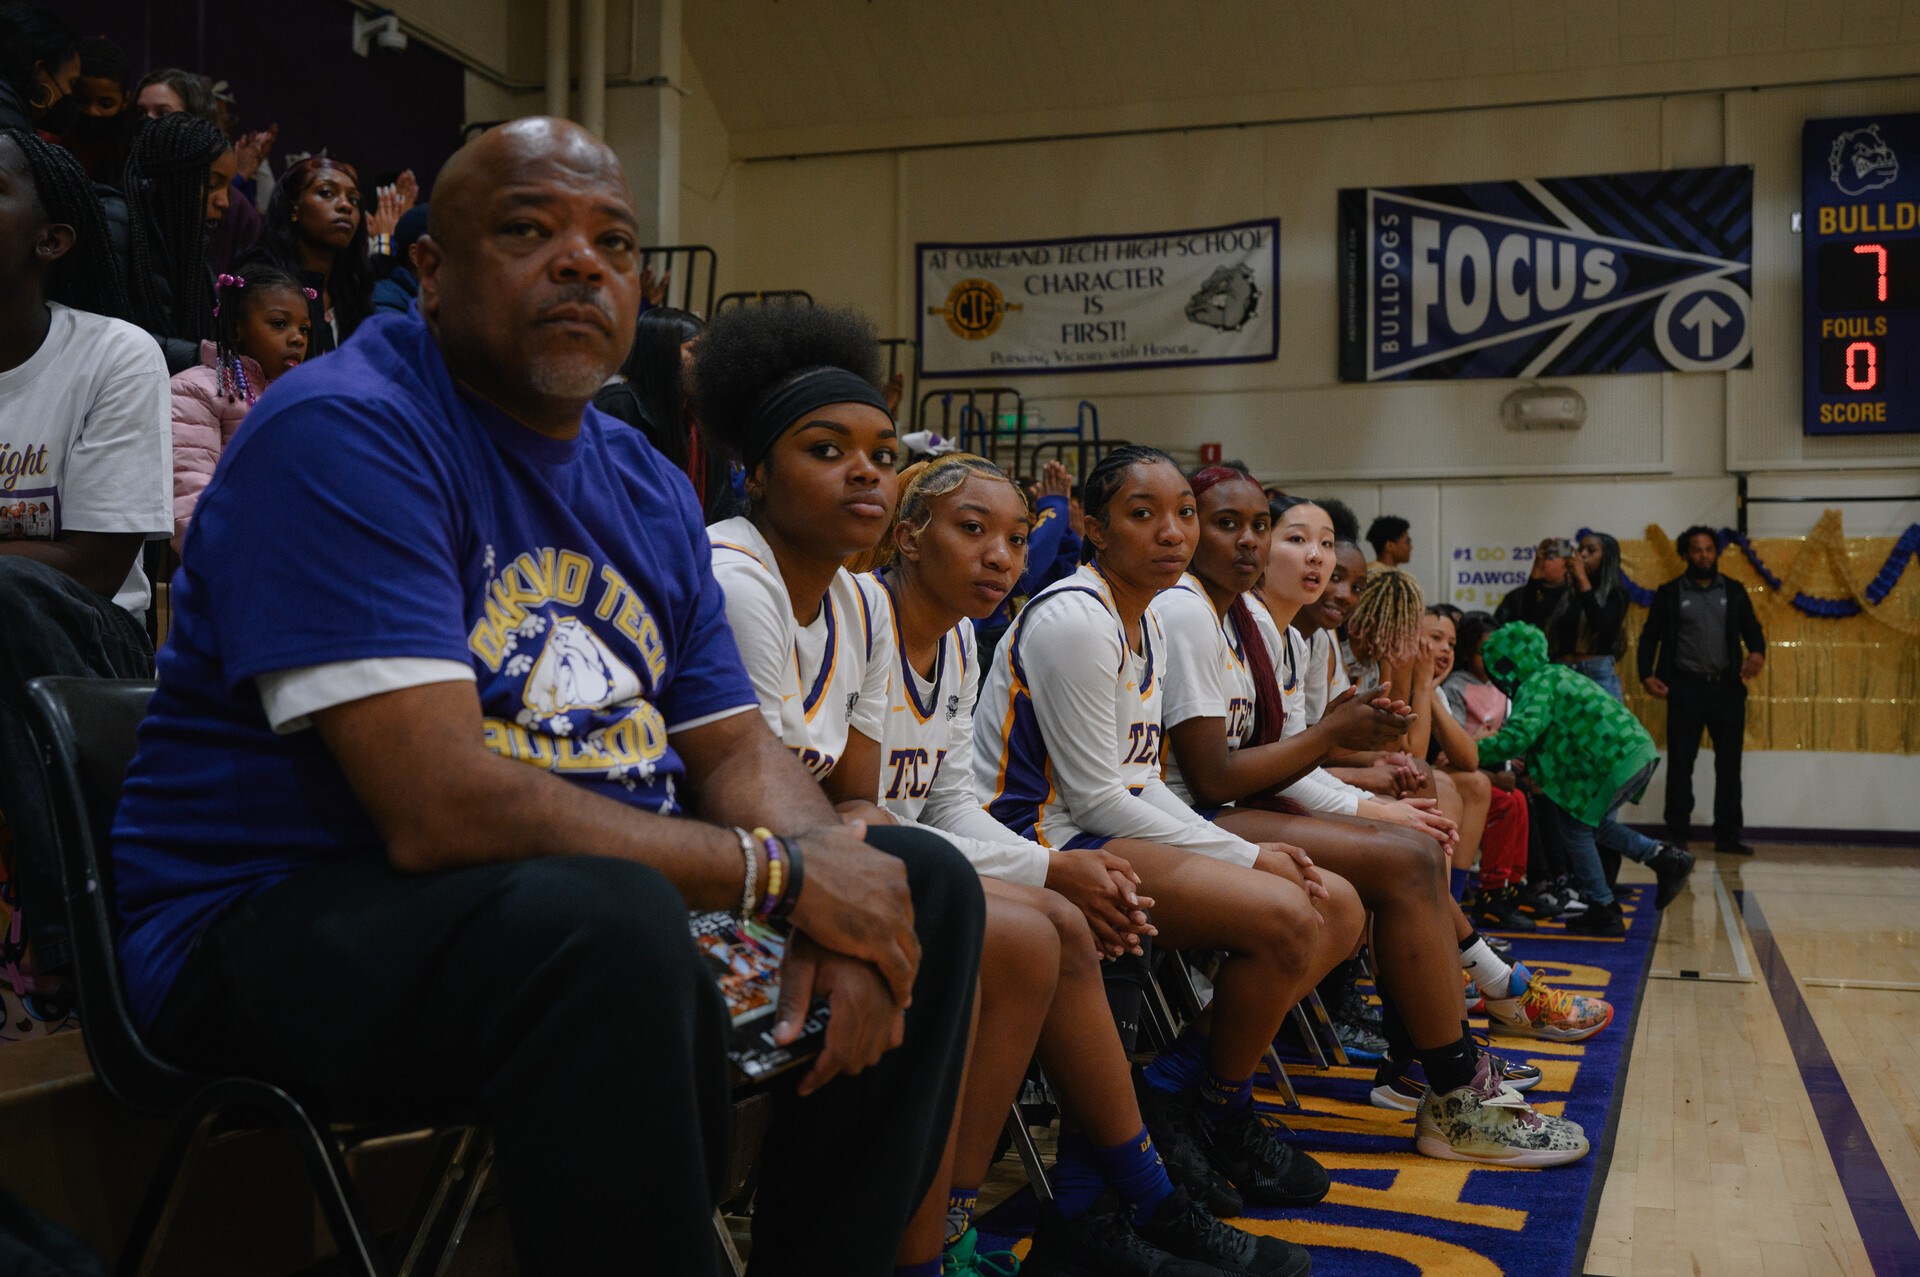 Perspective courtside photo of a coach wearing a purple shirt sitting next to six or seven high school girl basketball players wearing white jerseys